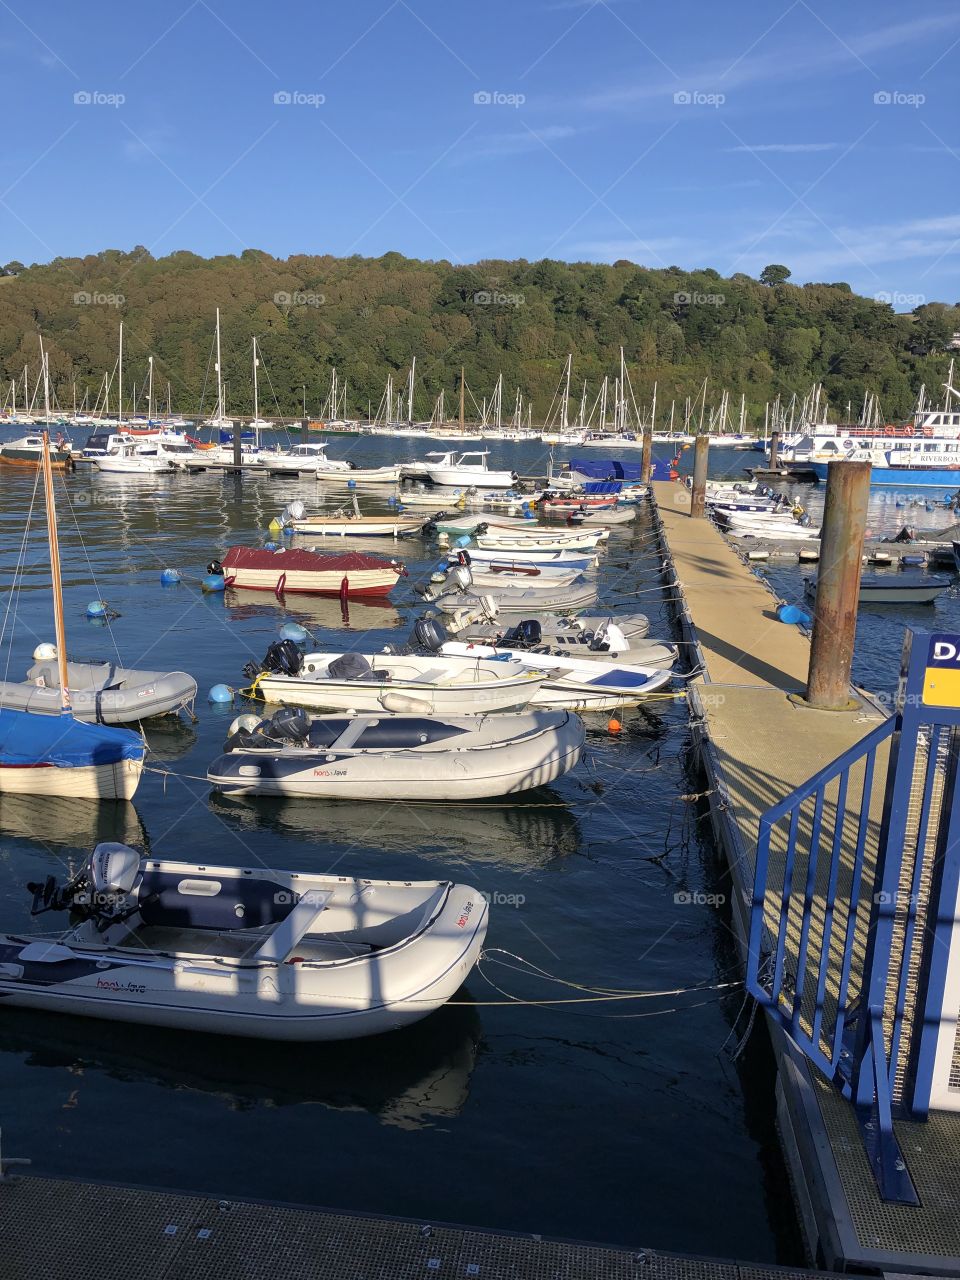 A stunning summers day on Dartmouth harbor yesterday.  Lovely sunny days in the UK are not always plentiful.